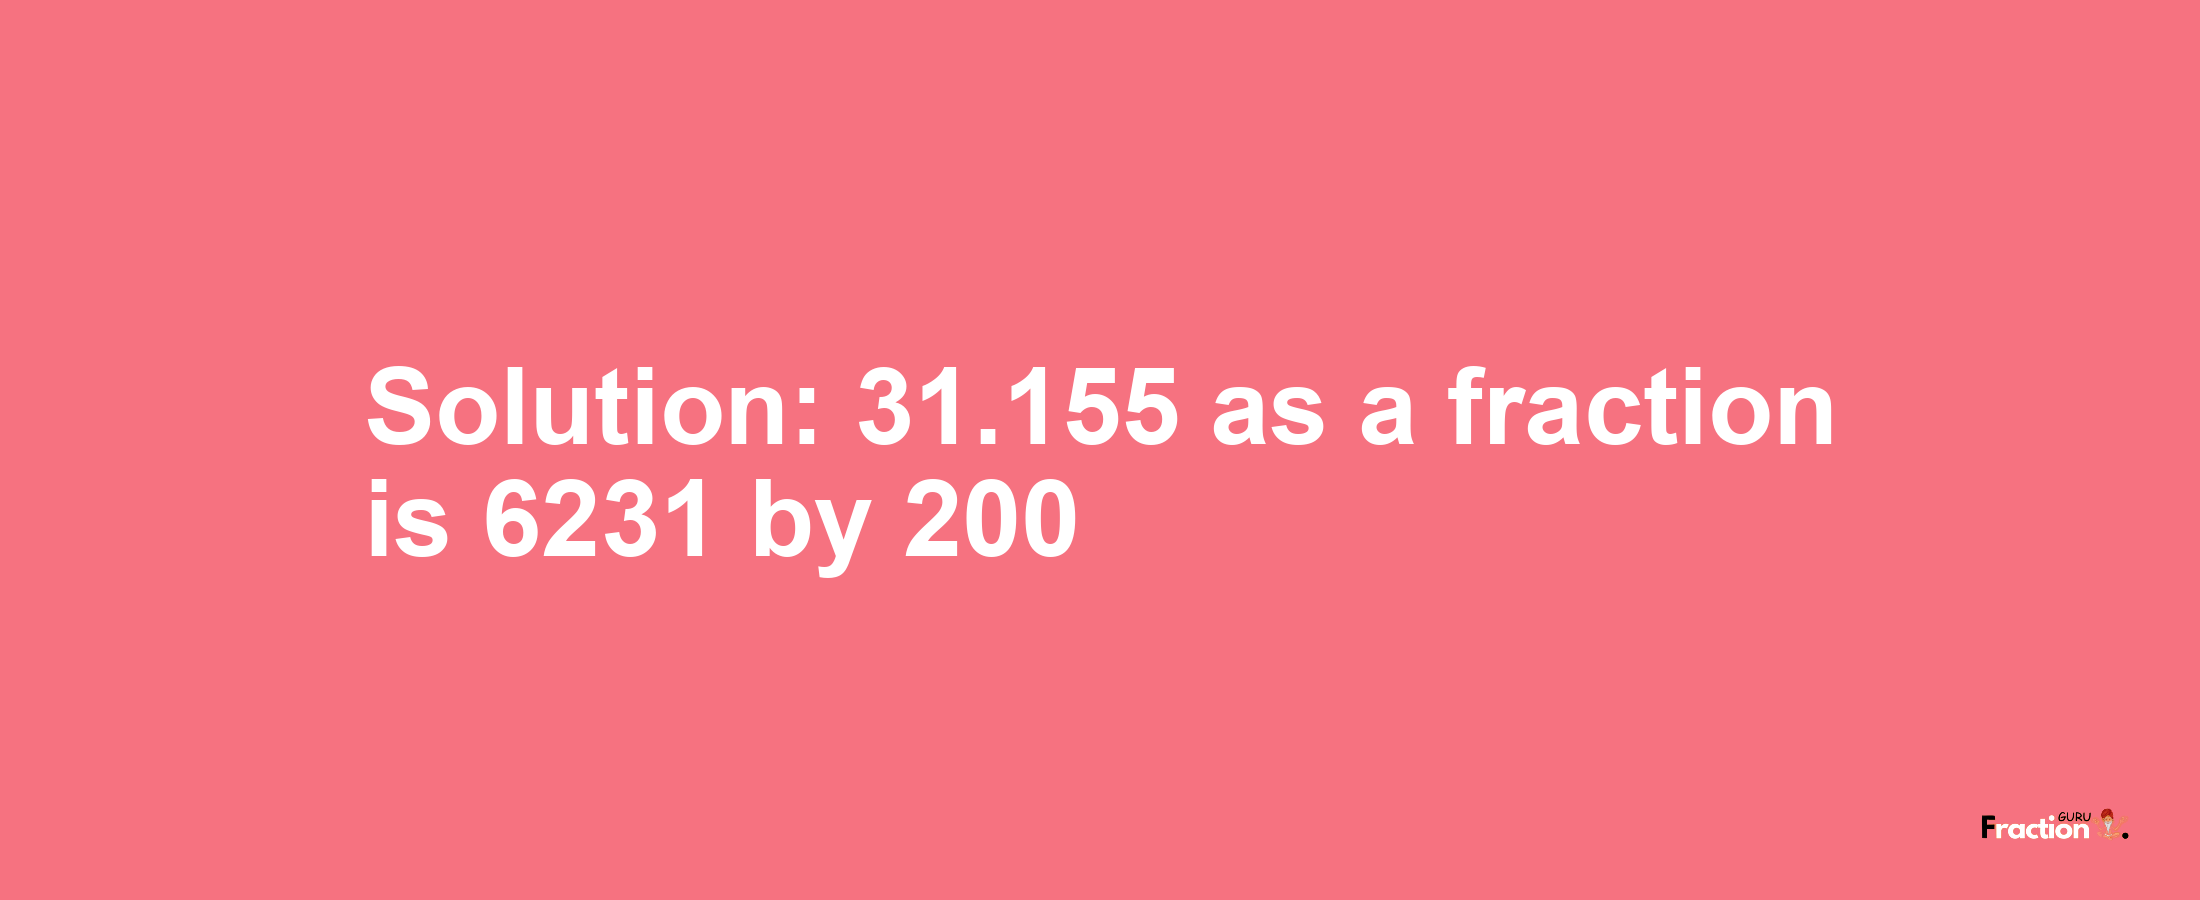 Solution:31.155 as a fraction is 6231/200